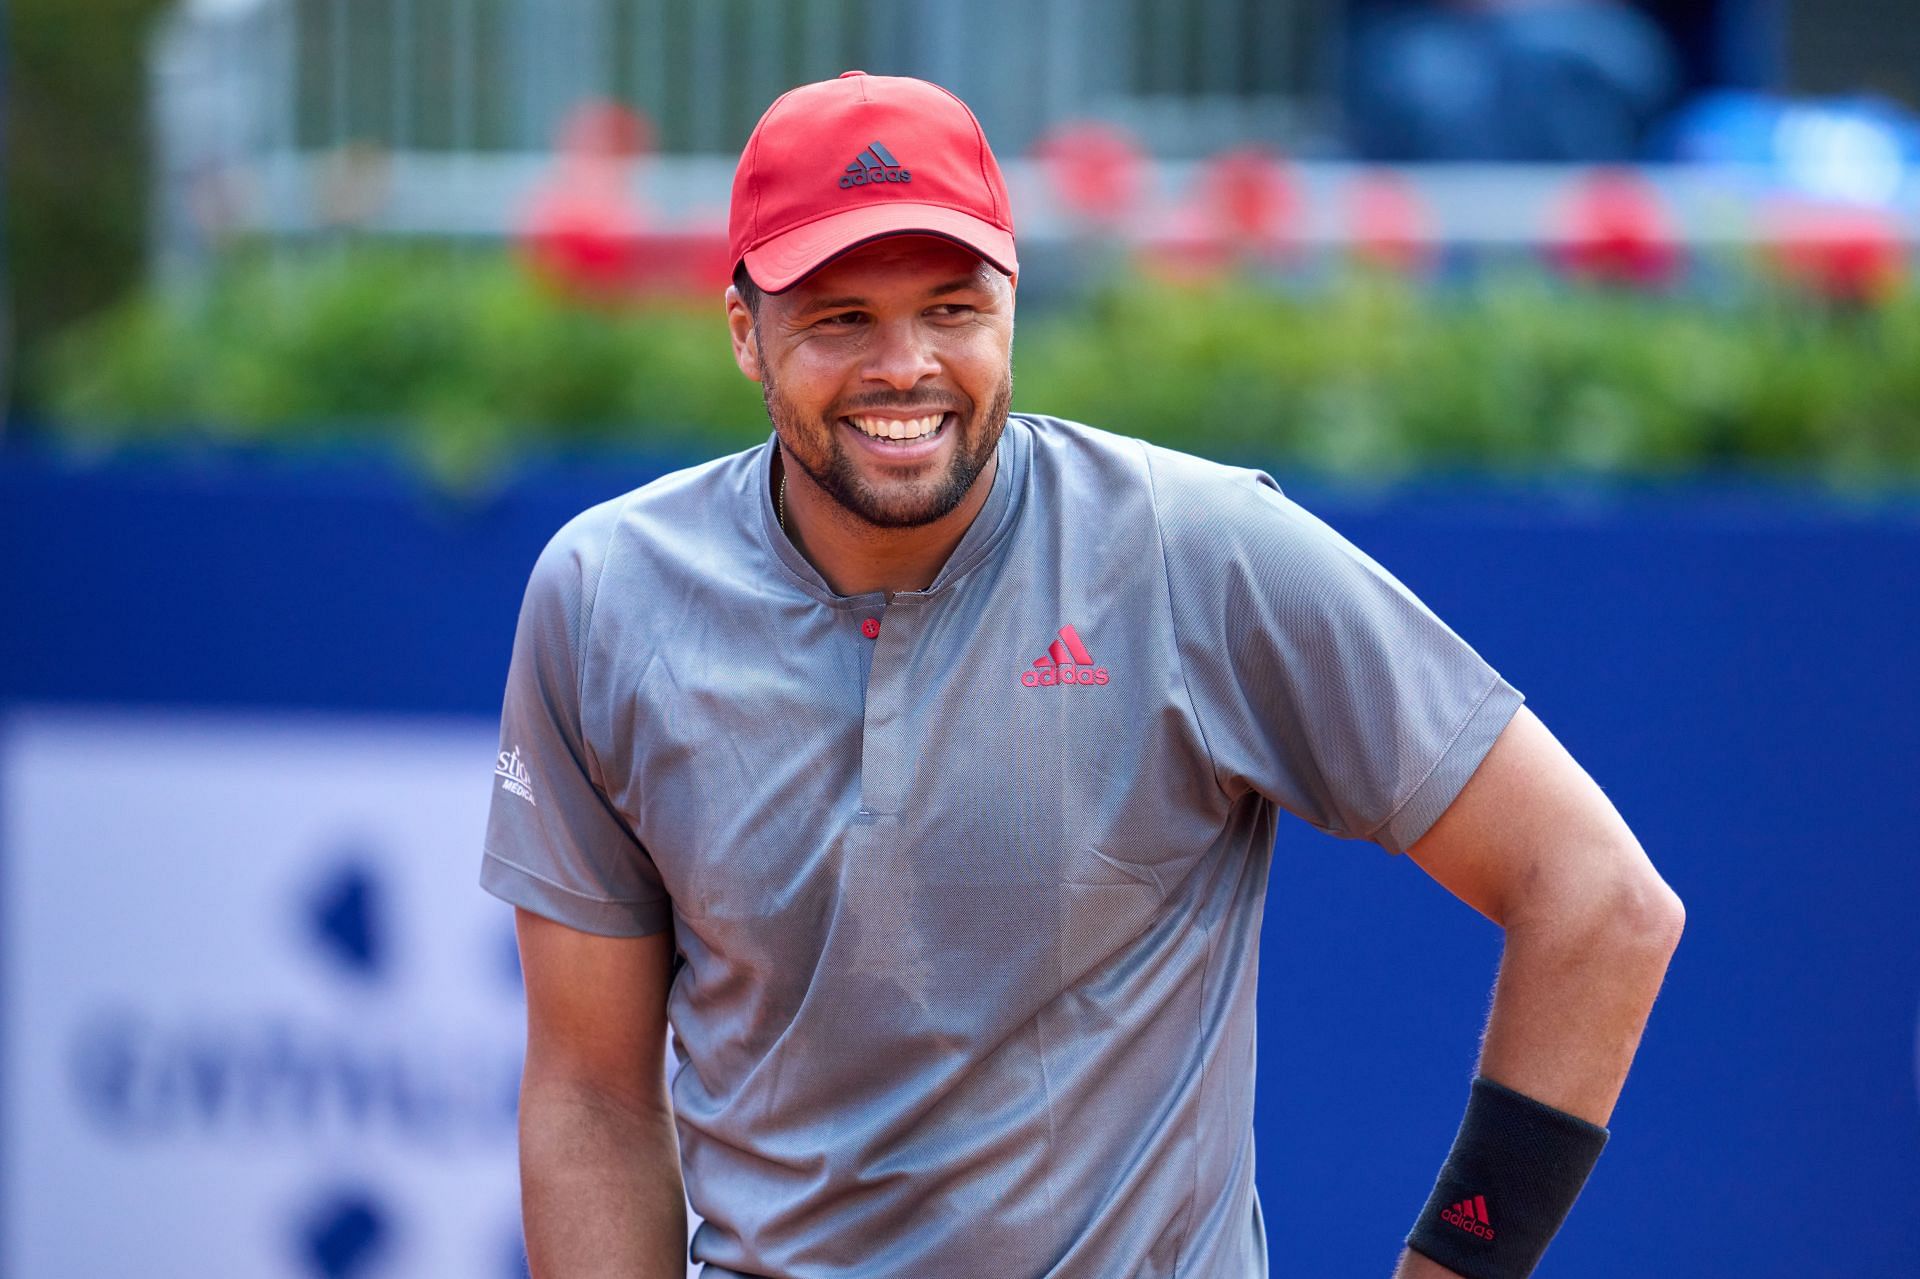 Jo-Wilfried Tsonga is among the few players to have received a wildcard for the 2022 French Open